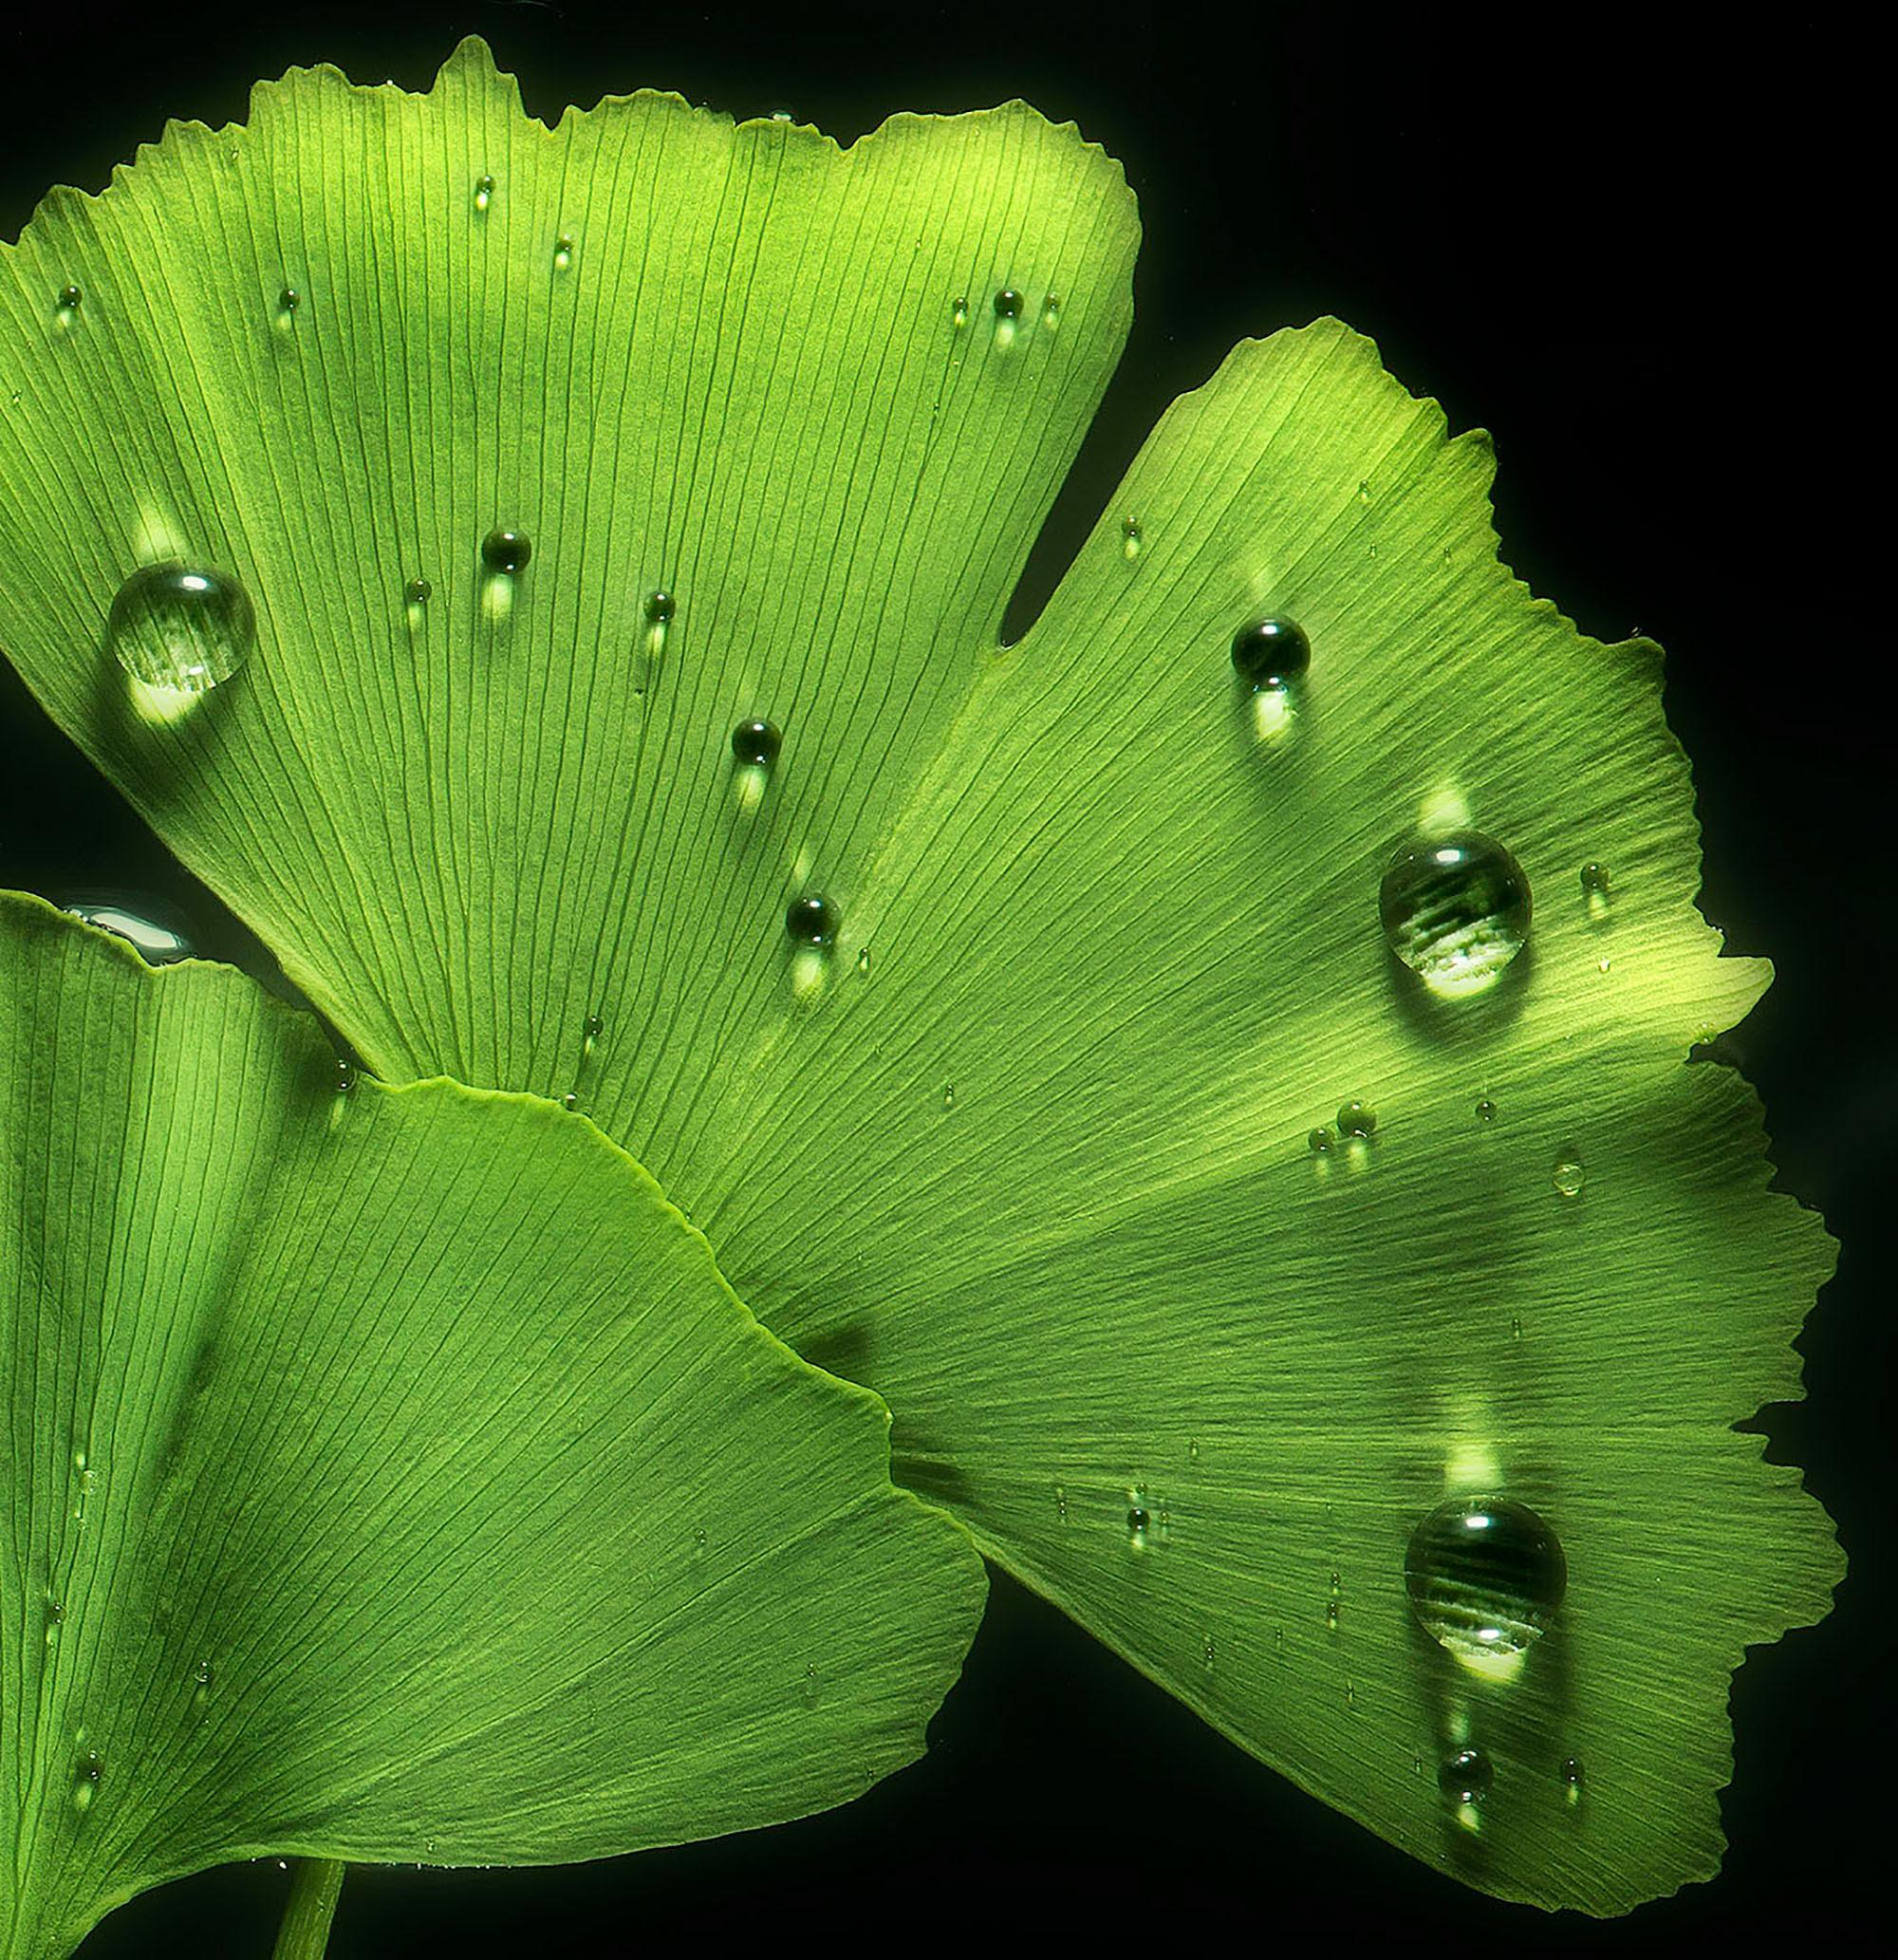 Ginko Biloba No. 1, floral photography, limited edition print, green art - Realist Photograph by Allan Forsyth